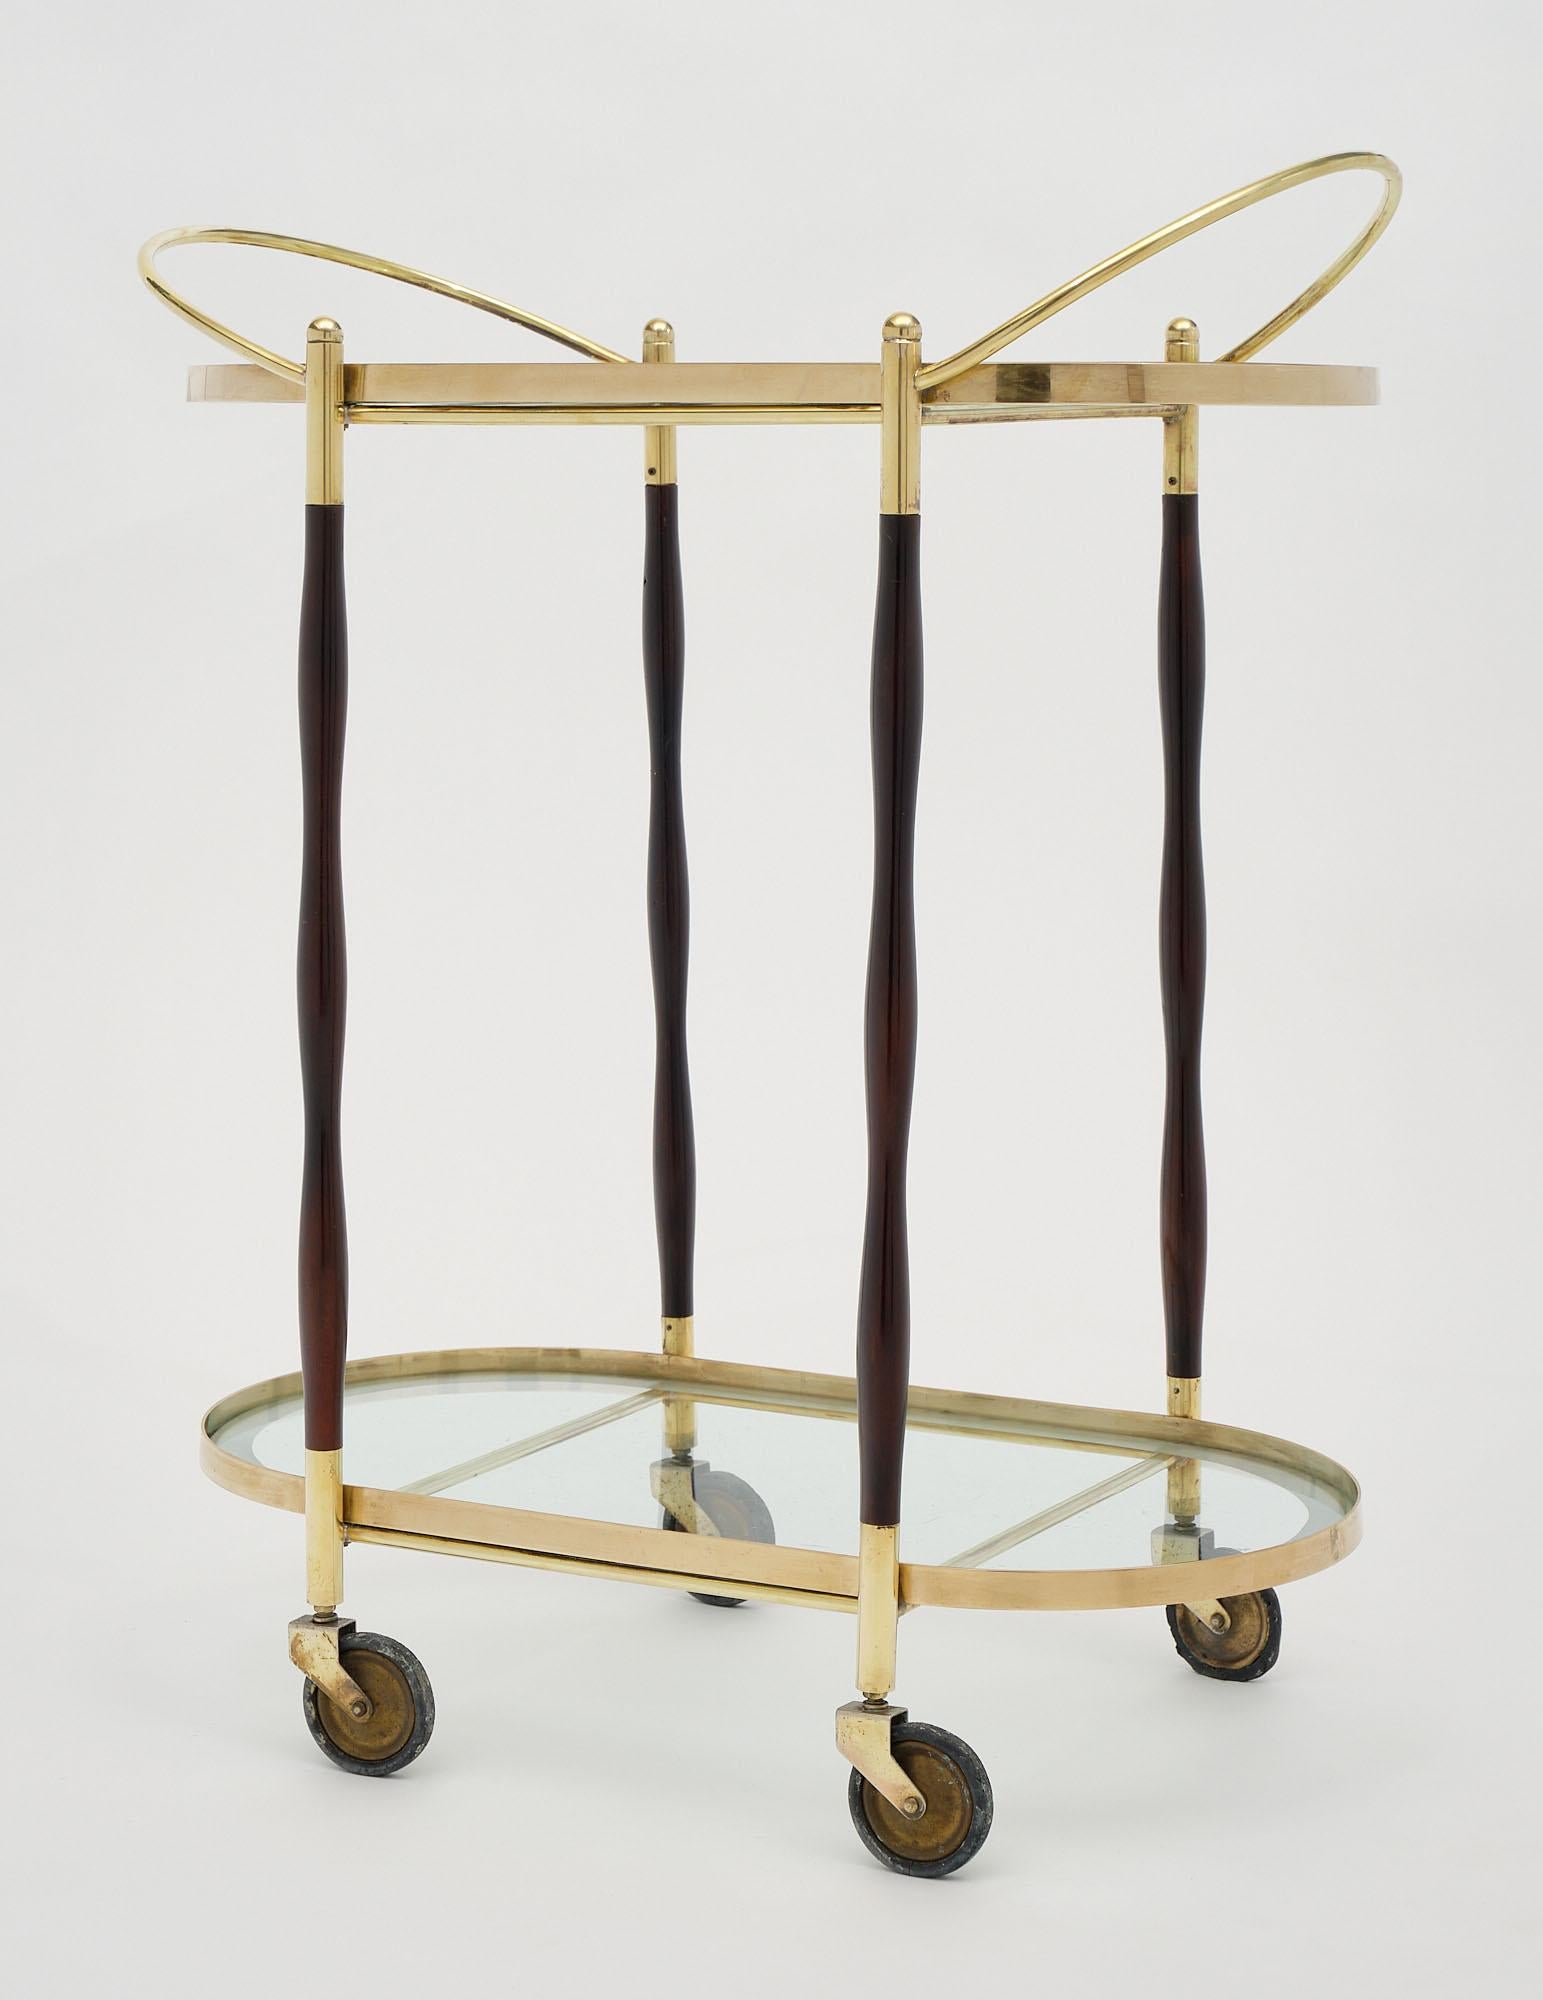 Bar cart from Italy from the Art Deco period made of solid polished brass and featuring two clear glass shelves with a frosted edge. There are four ebonized and French polished turned wood legs.